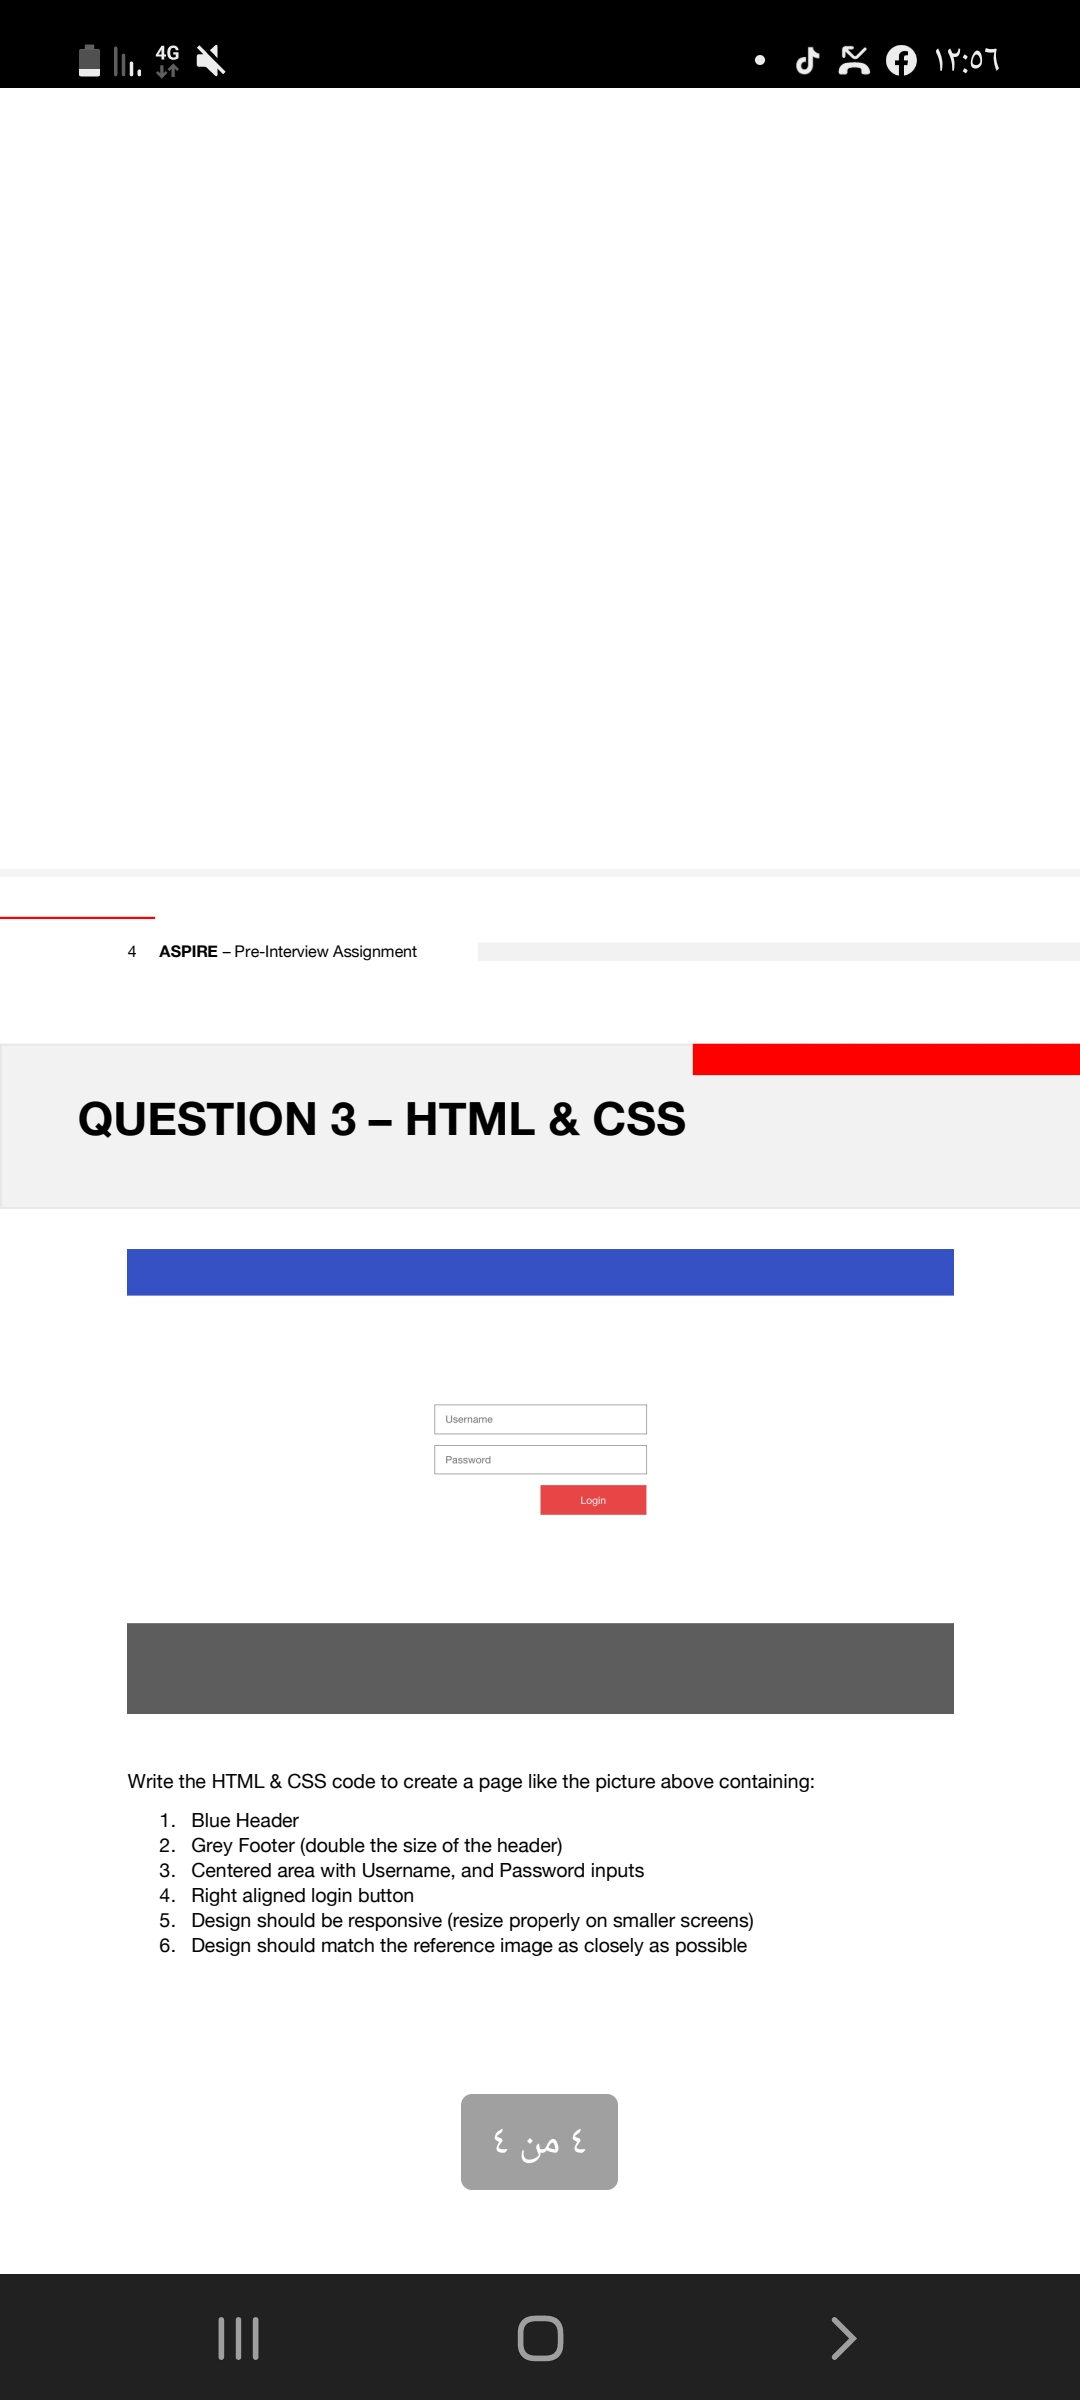 4G
19:07
4
ASPIRE - Pre-Interview Assignment
QUESTION 3 – HTML & CSS
Username
Password
Login
Write the HTML & CSS code to create a page like the picture above containing:
1. Blue Header
2. Grey Footer (double the size of the header)
3. Centered area with Username, and Password inputs
4. Right aligned login button
5. Design should be responsive (resize properly on smaller screens)
6. Design should match the reference image as closely as possible
4 من 4
II
>
